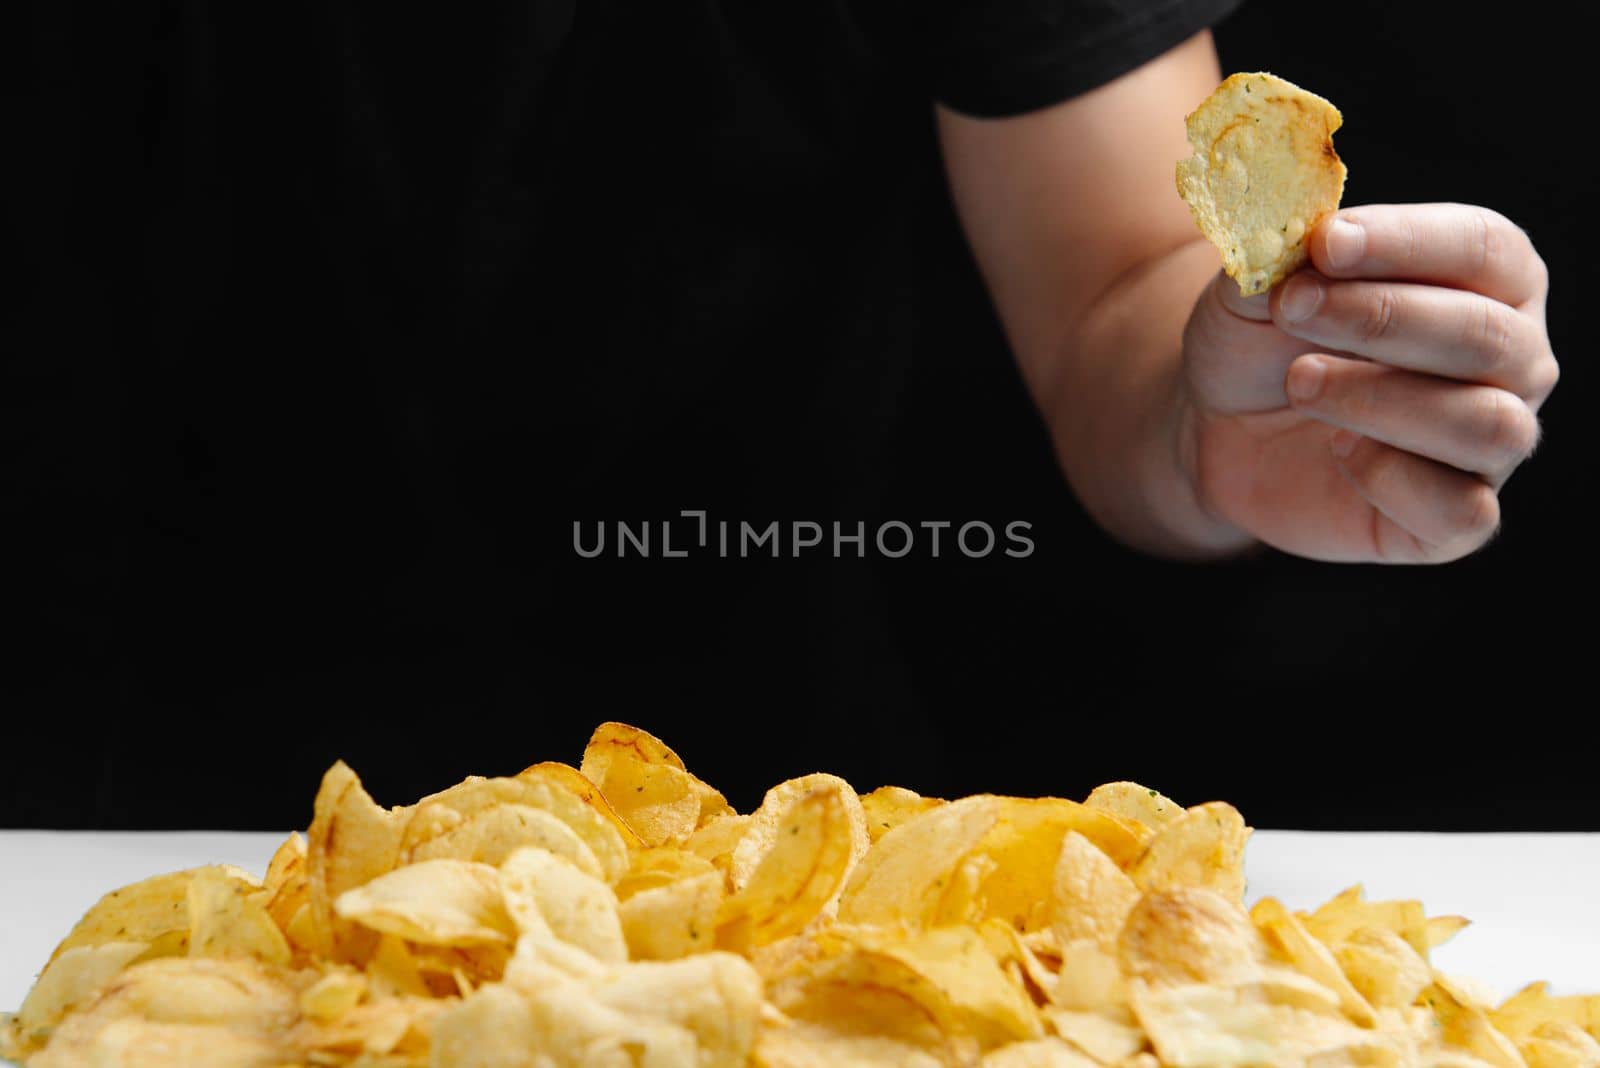 The man is eating junk food, chips on a dark background. Harmful food. Fried food is bad for your health. Healthy lifestyle, proper nutrition, ban on unhealthy foods. The ban on chips. Stop banned foods